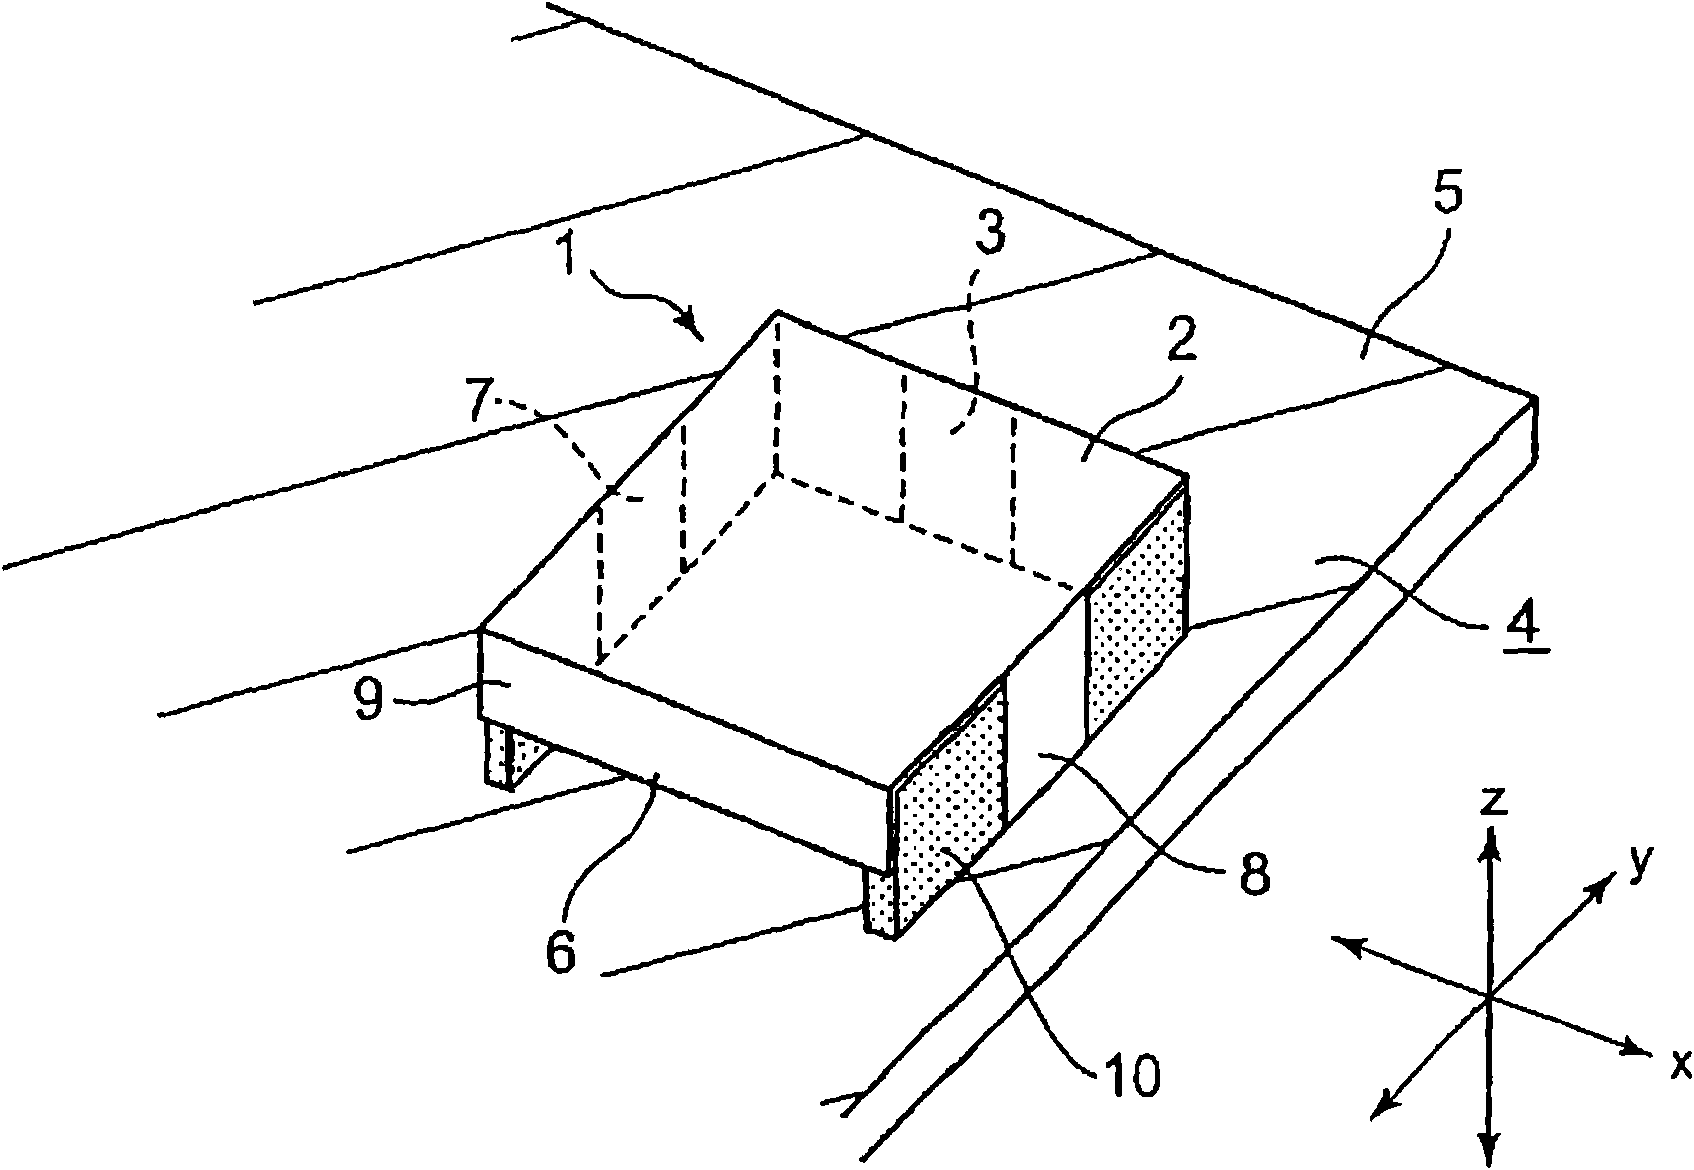 Antenna and communication device with that antenna